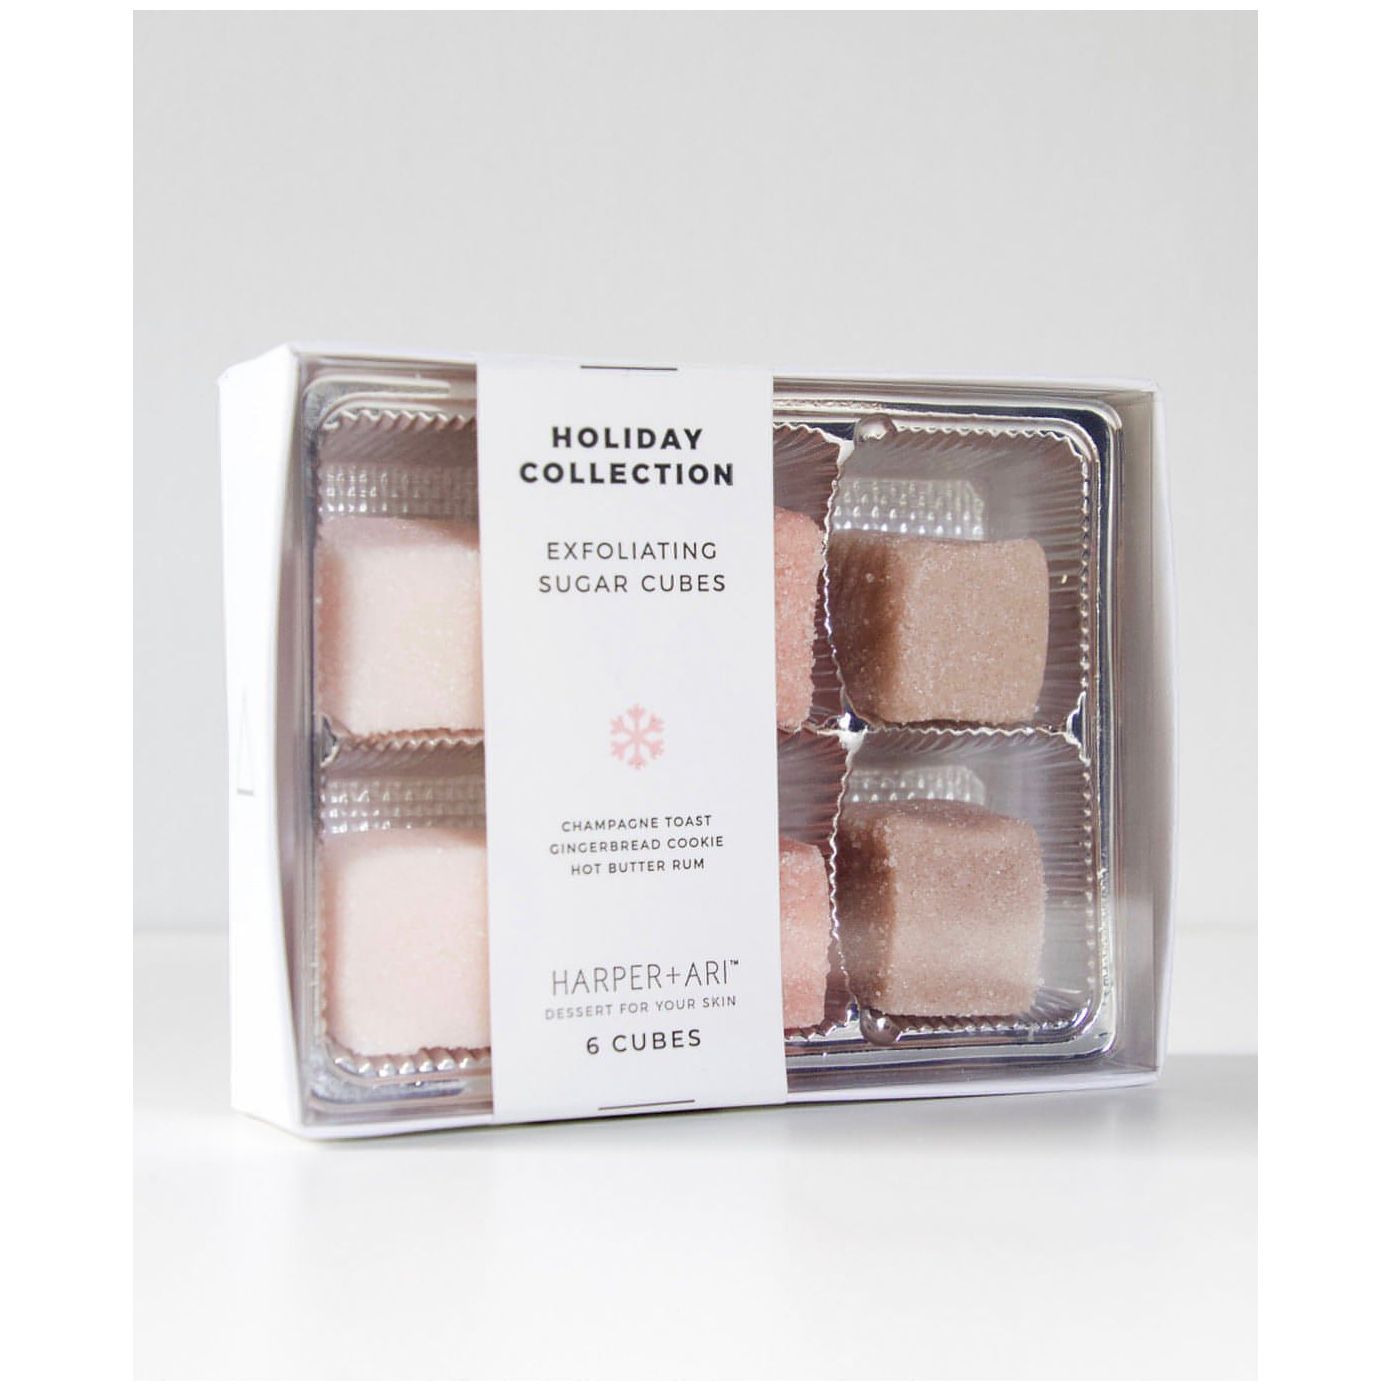 Harper+Ari - exfoliating sugar cubes luxe collection gift box natural brown Raw Cube Sugar 6 cubes - Brandat Outlet